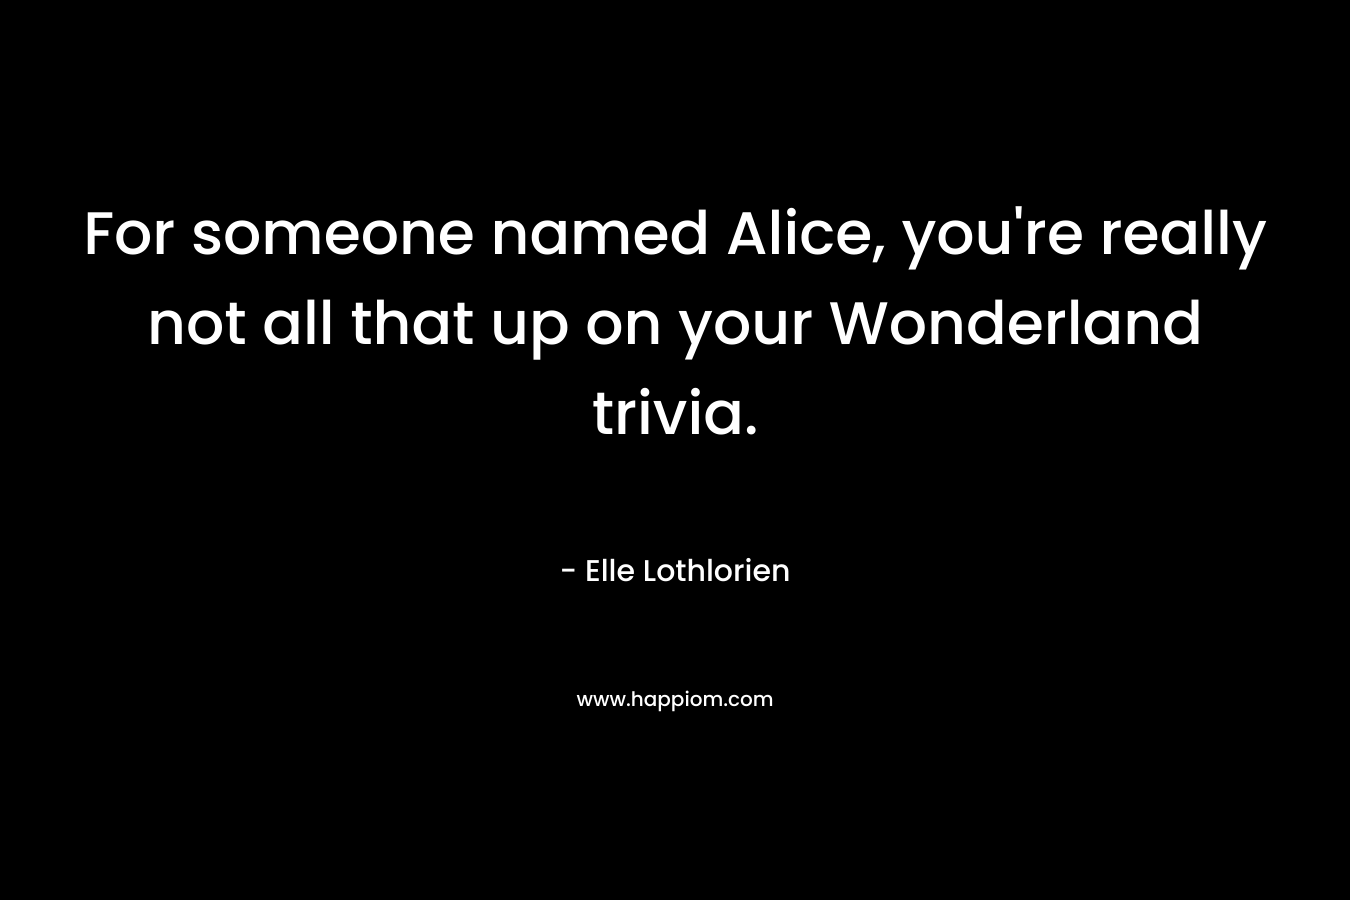 For someone named Alice, you're really not all that up on your Wonderland trivia.